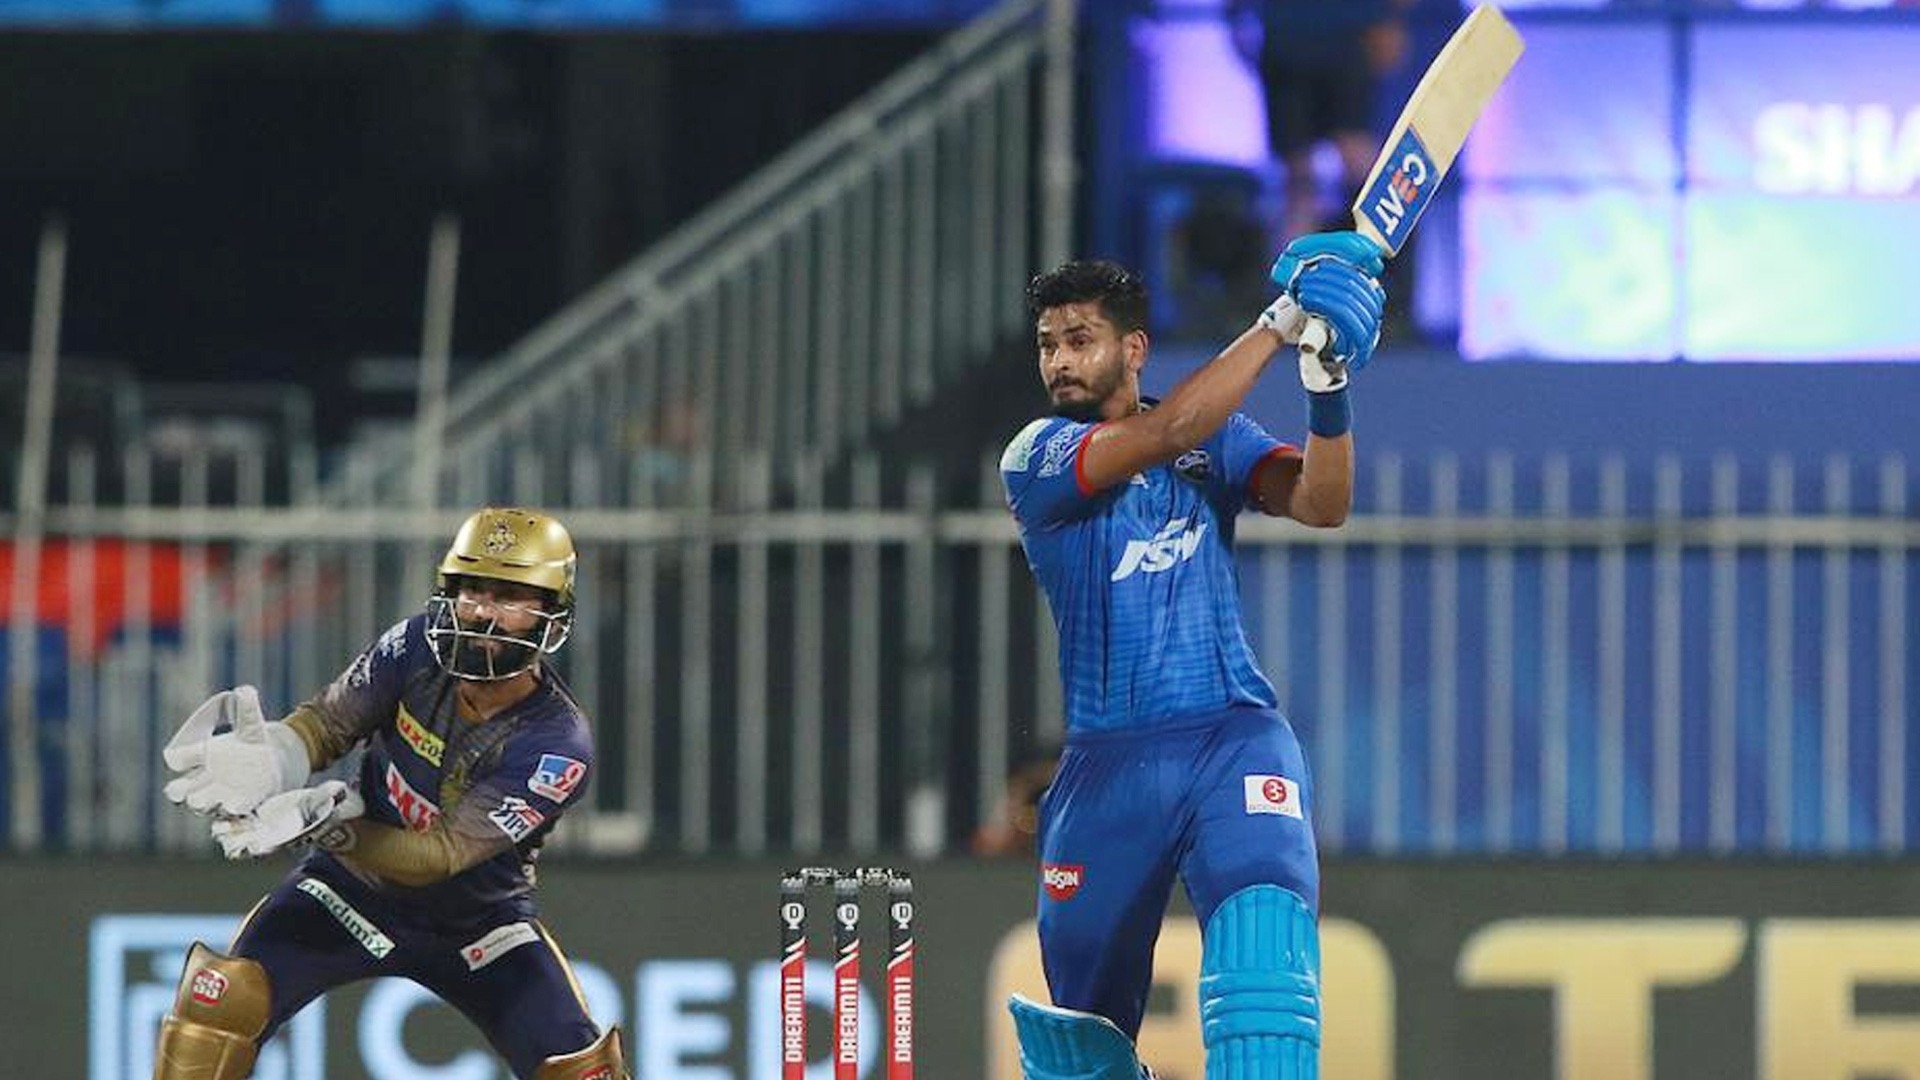 Delhi Capitals captain Shreyas Iyer scored his fastest fifty in the IPL in the match against KKR.